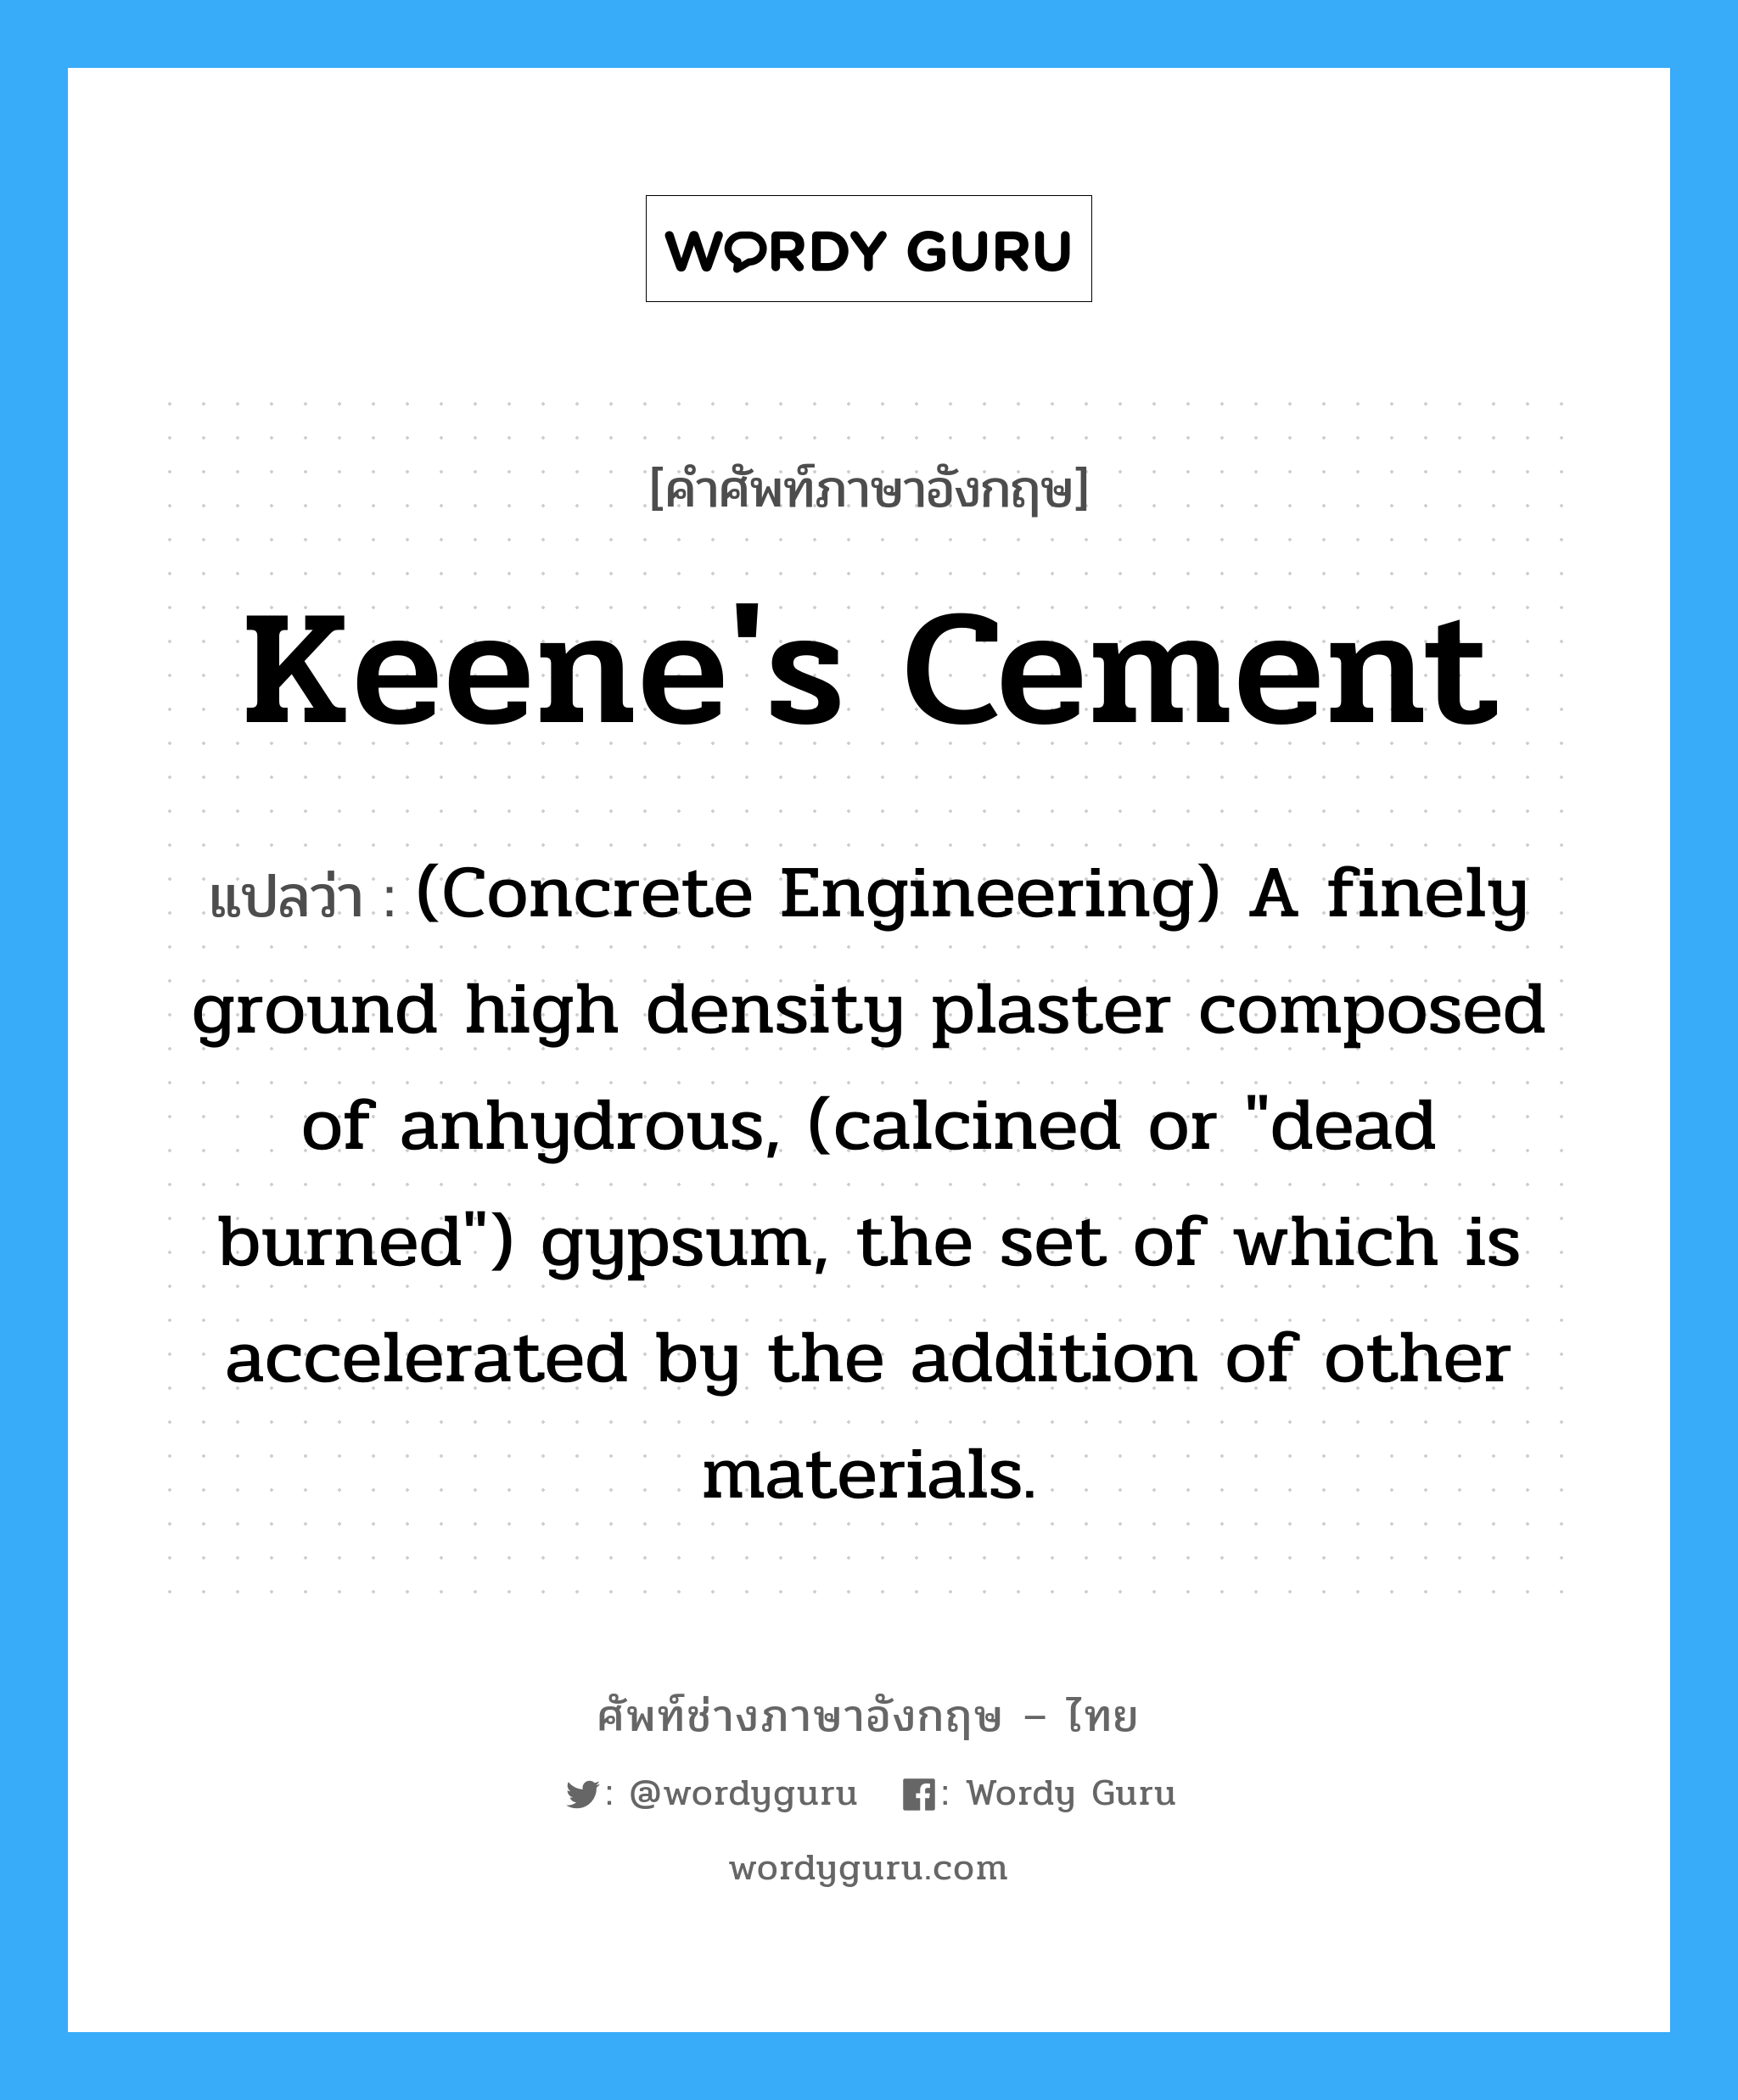 Keene's Cement แปลว่า?, คำศัพท์ช่างภาษาอังกฤษ - ไทย Keene's Cement คำศัพท์ภาษาอังกฤษ Keene's Cement แปลว่า (Concrete Engineering) A finely ground high density plaster composed of anhydrous, (calcined or "dead burned") gypsum, the set of which is accelerated by the addition of other materials.